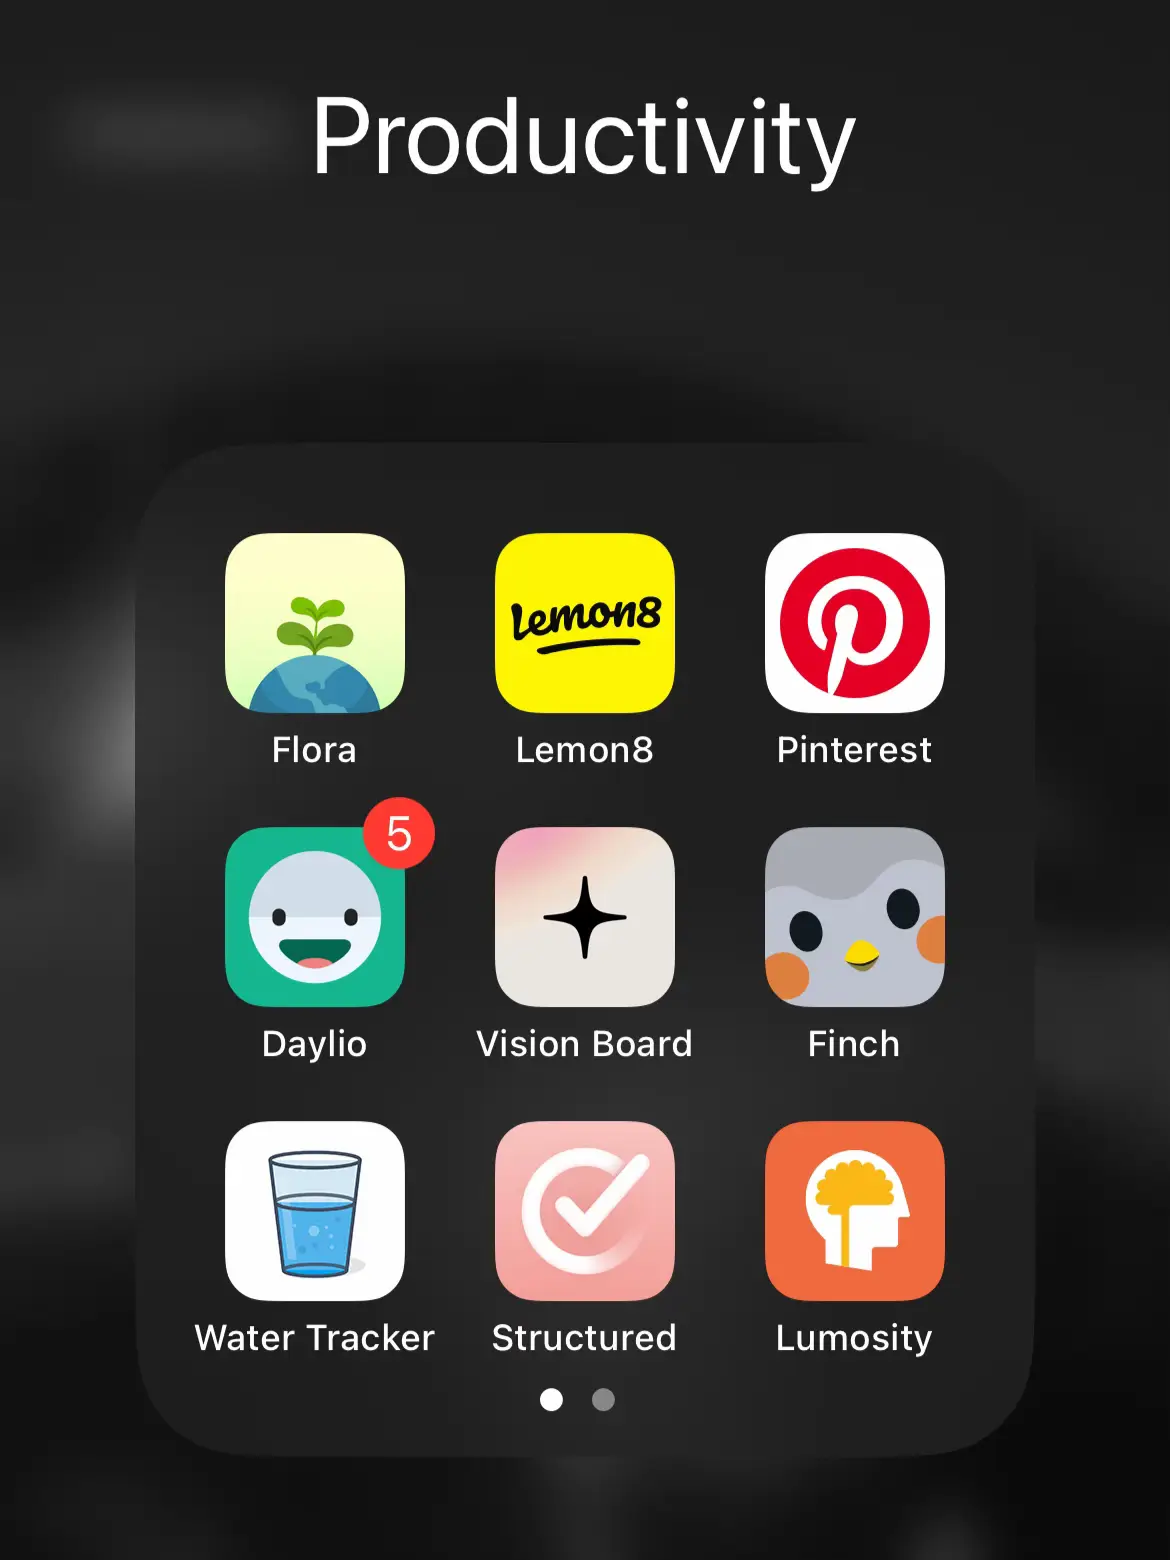  A list of productivity apps including a water tracker and a vision board.